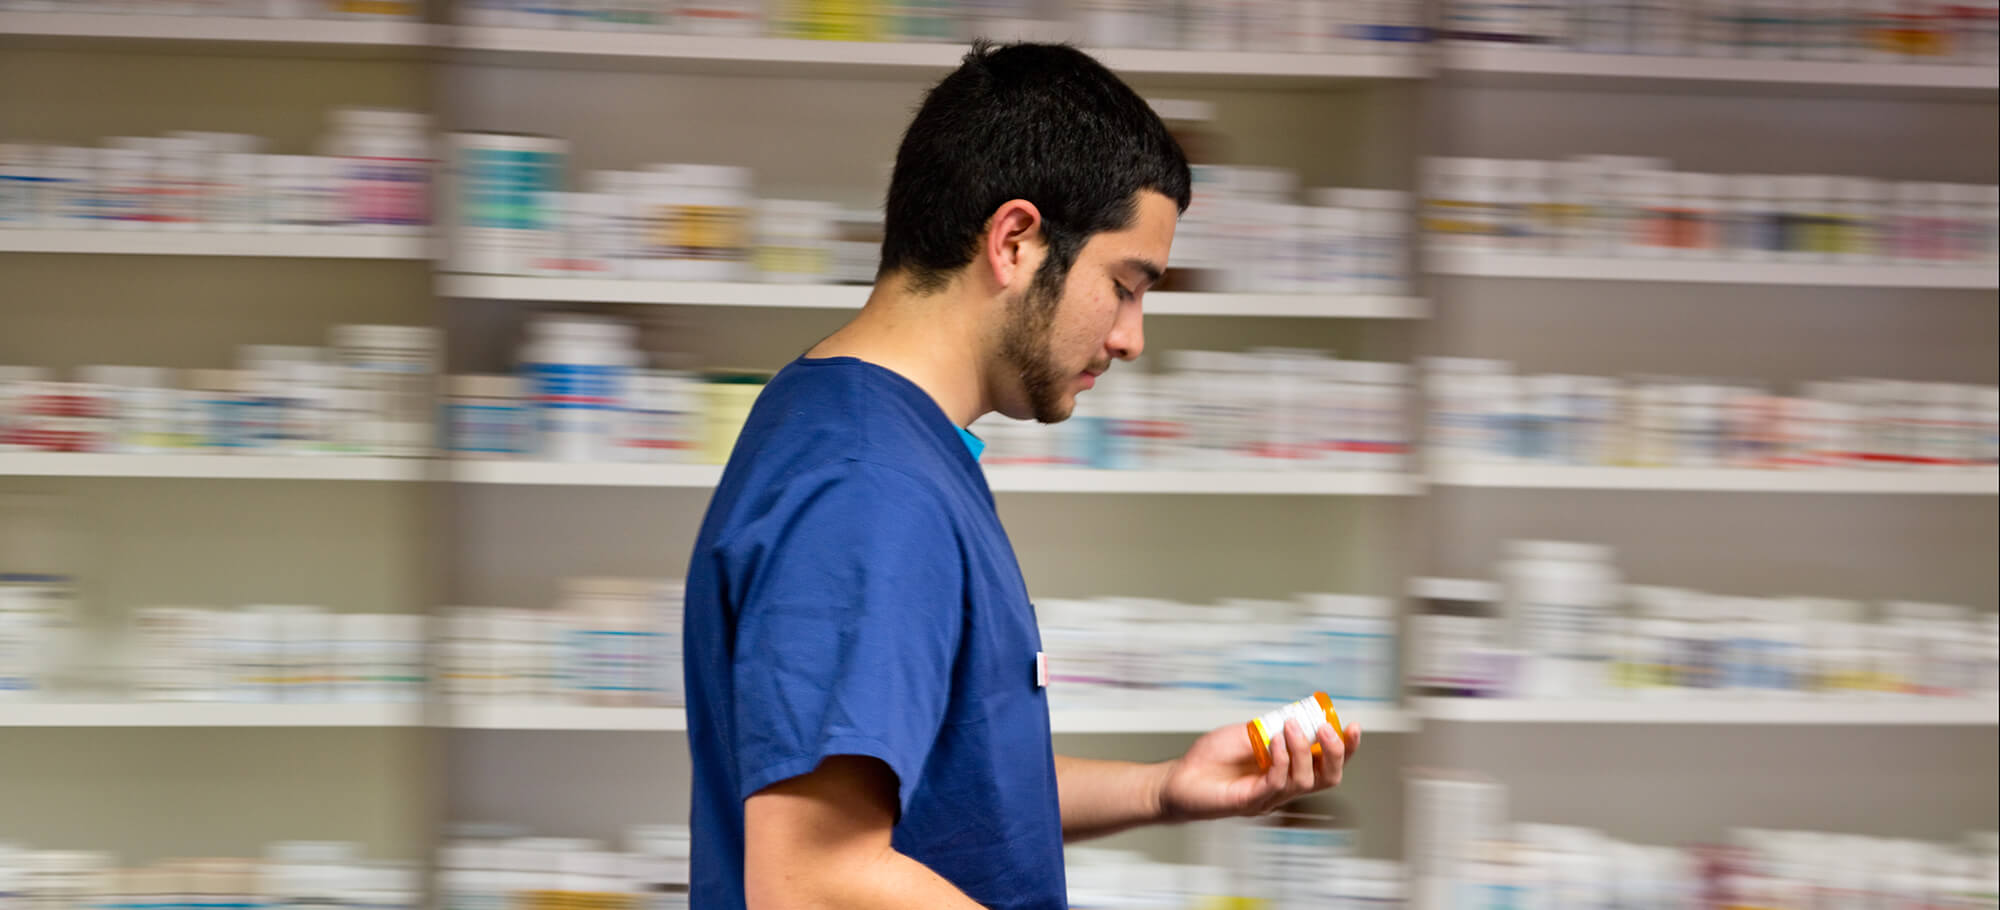 A student holds a pill bottle while walking past shelves set up like a pharmacy.